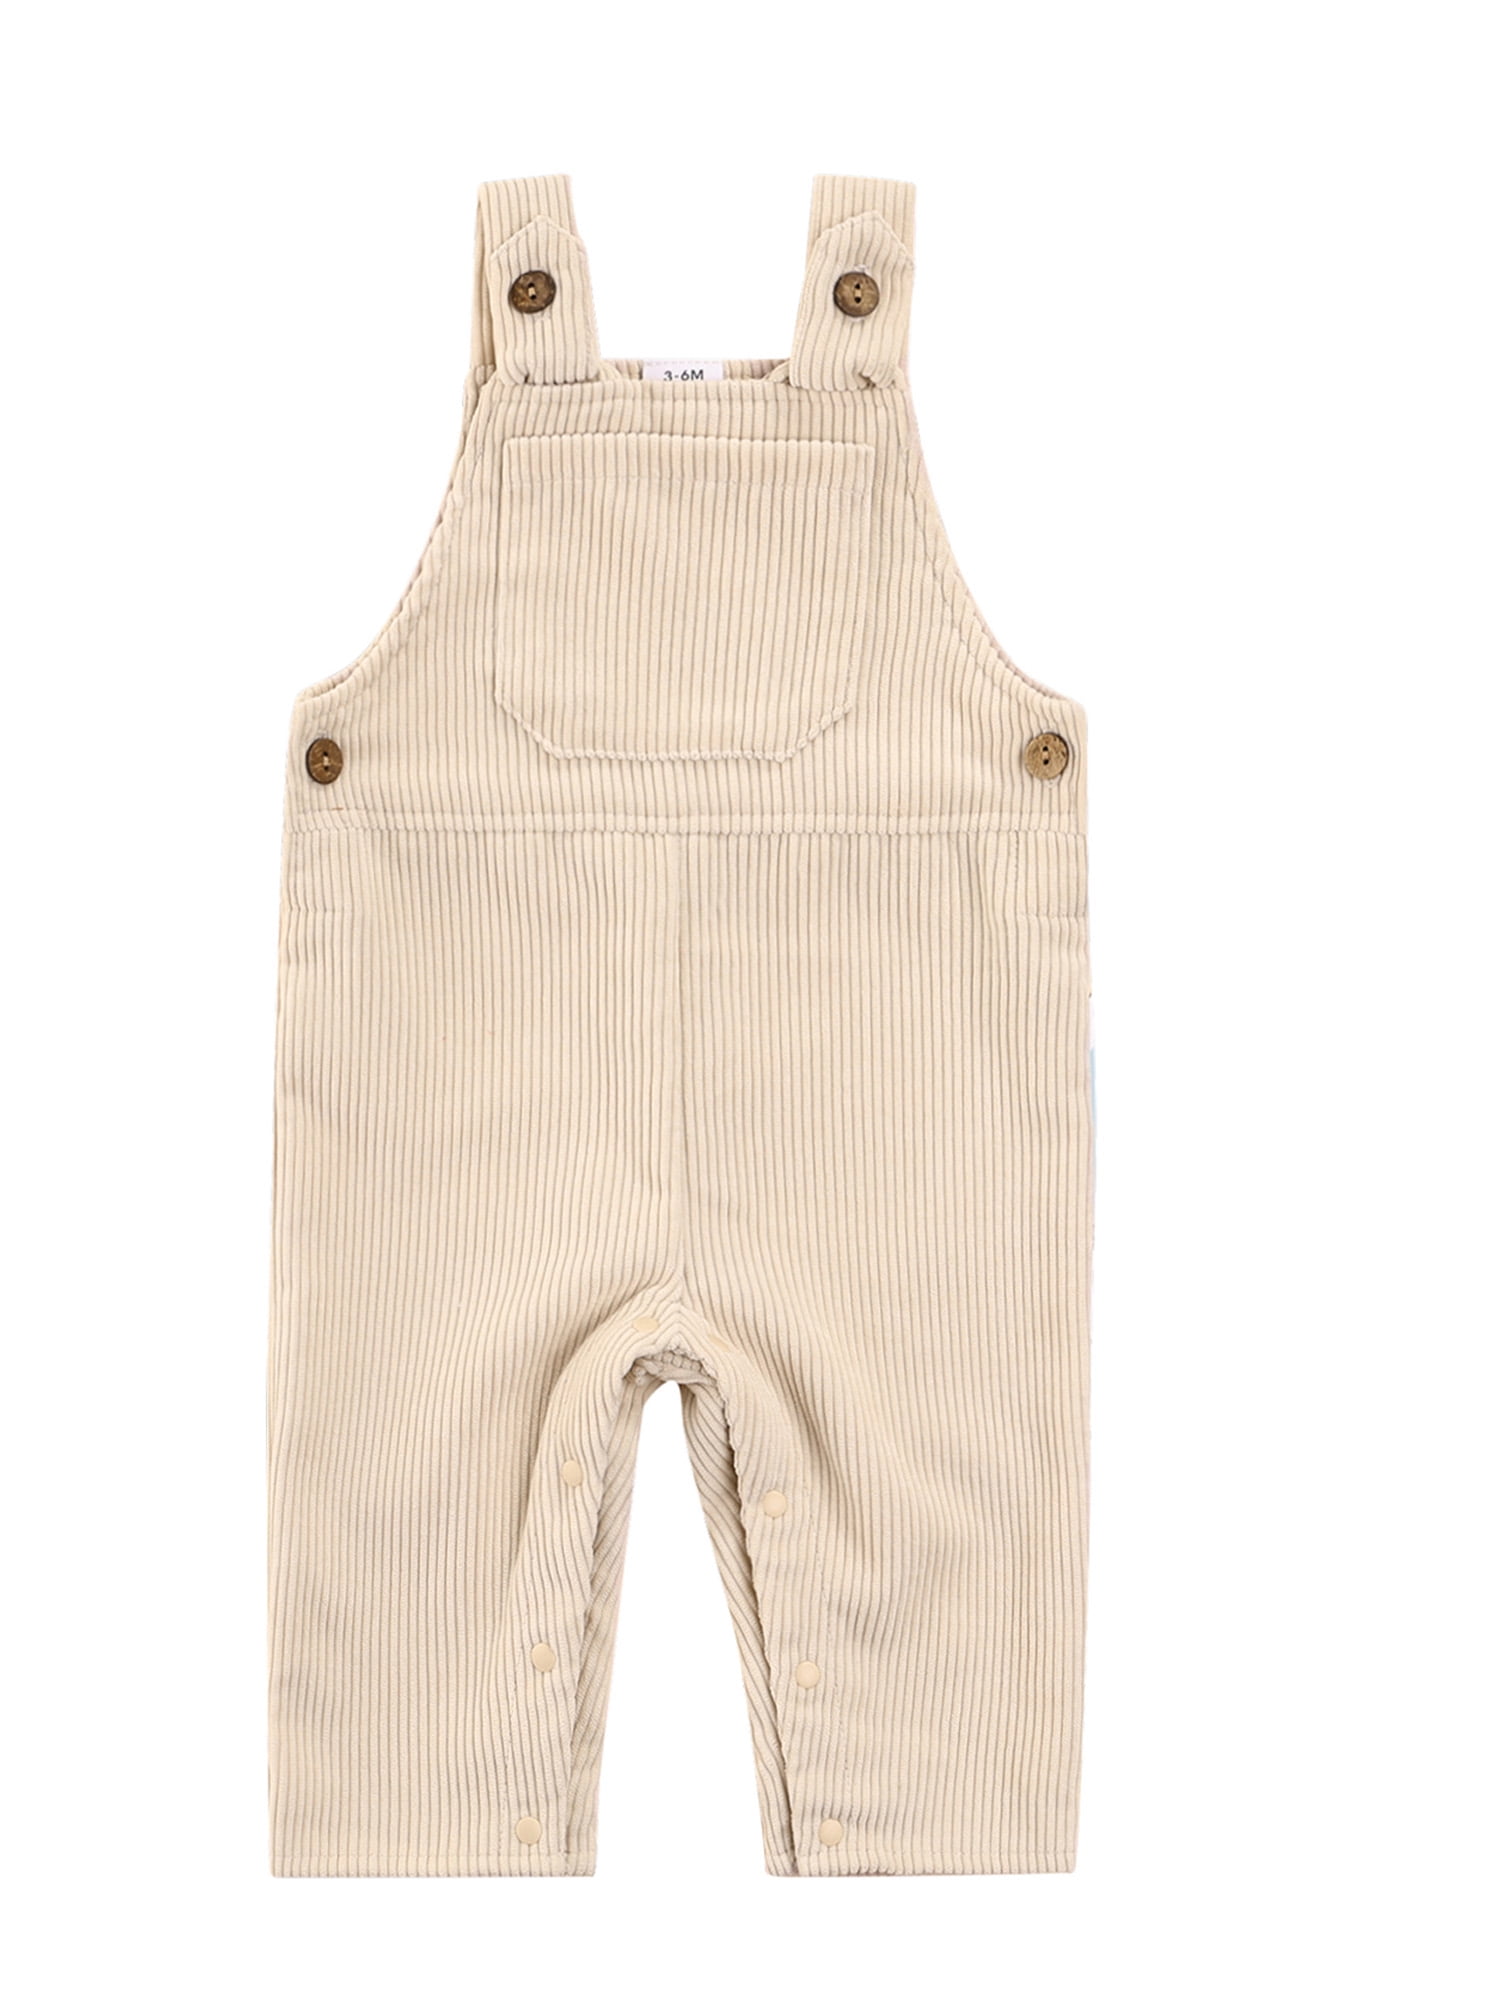 Toddler Baby Boys Girls Overalls Solid Color Corduroy Suspender Romper Long Pants Spring Fall Outfit 